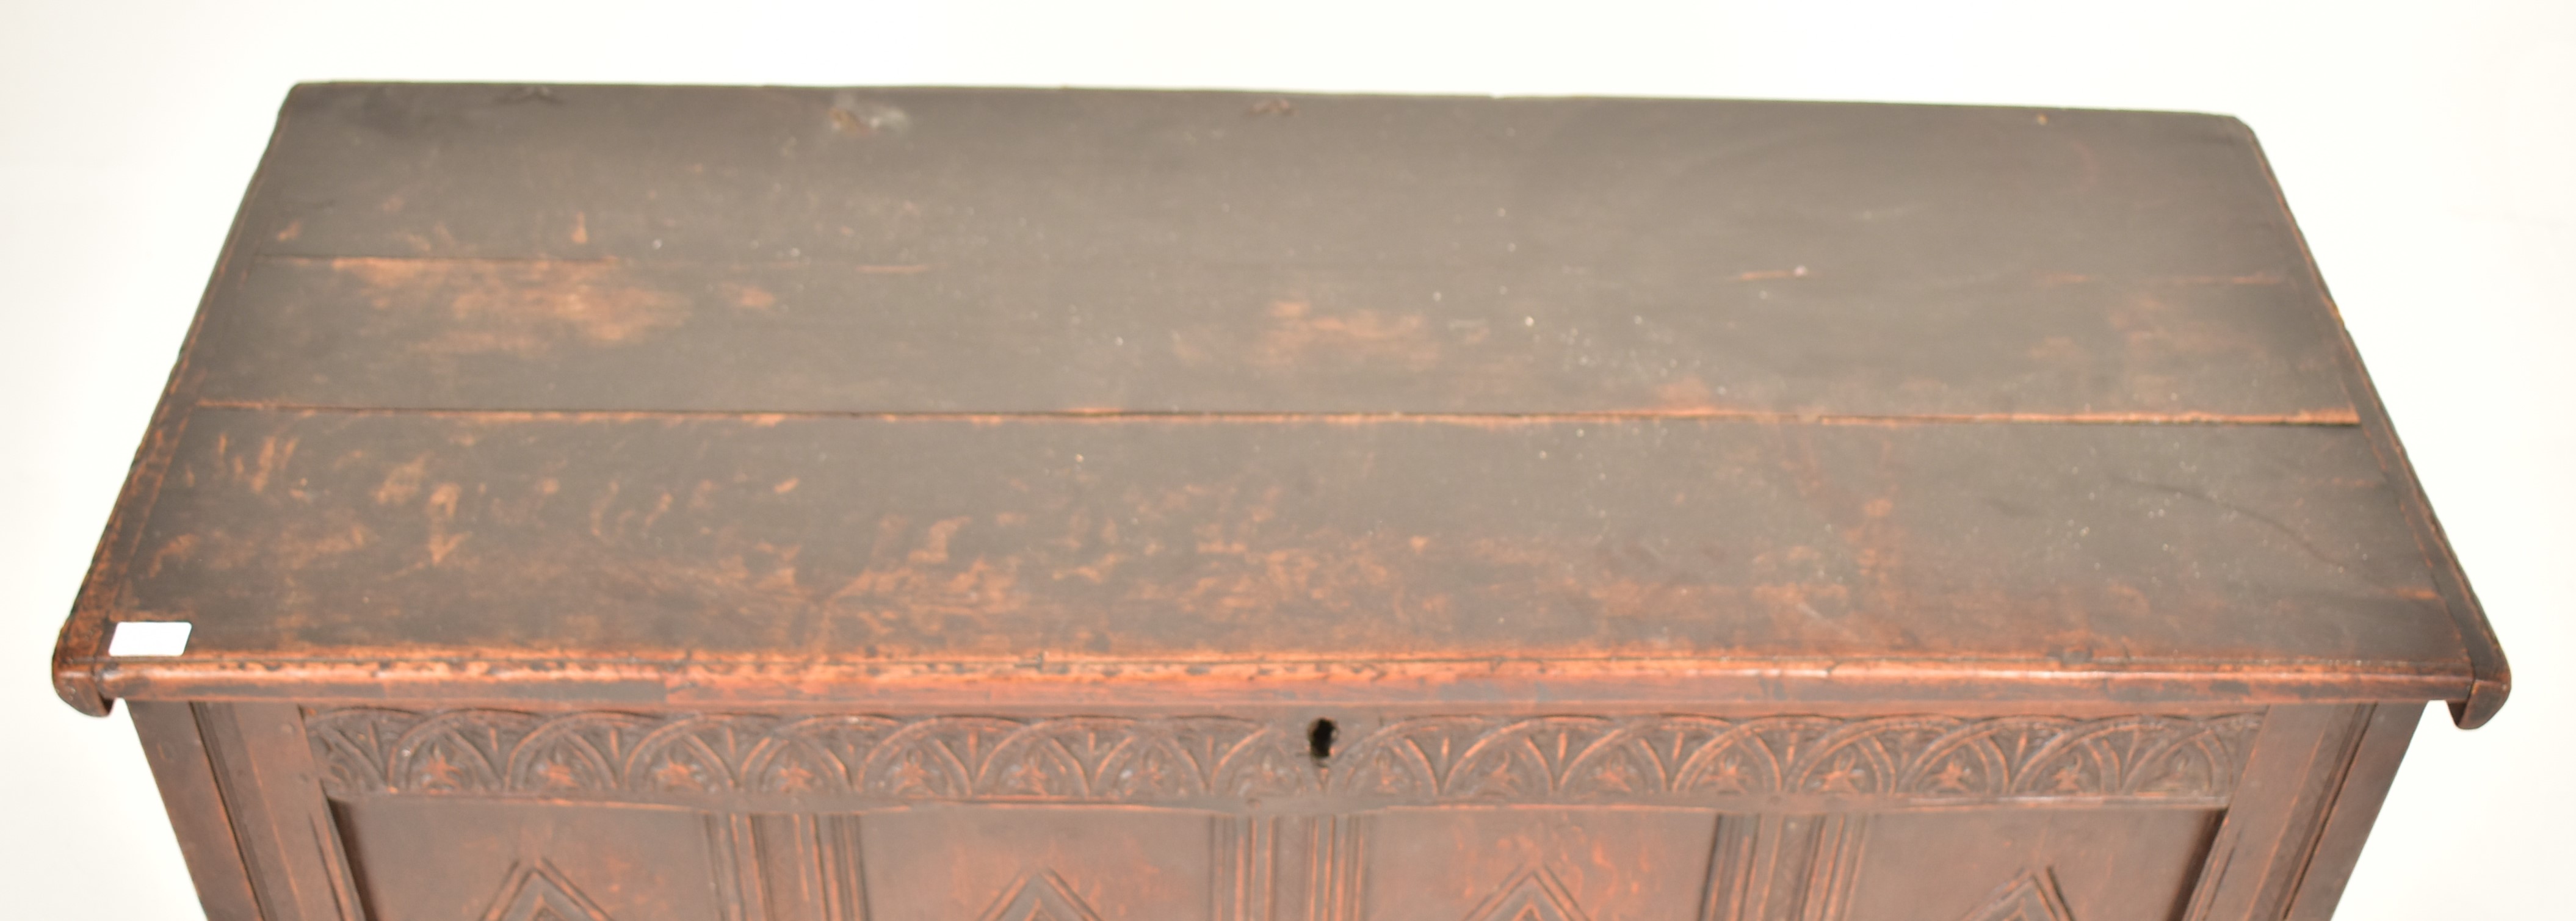 LATE 17TH CENTURY CARVED OAK HINGED TOP TRUNK CHEST - Image 2 of 5